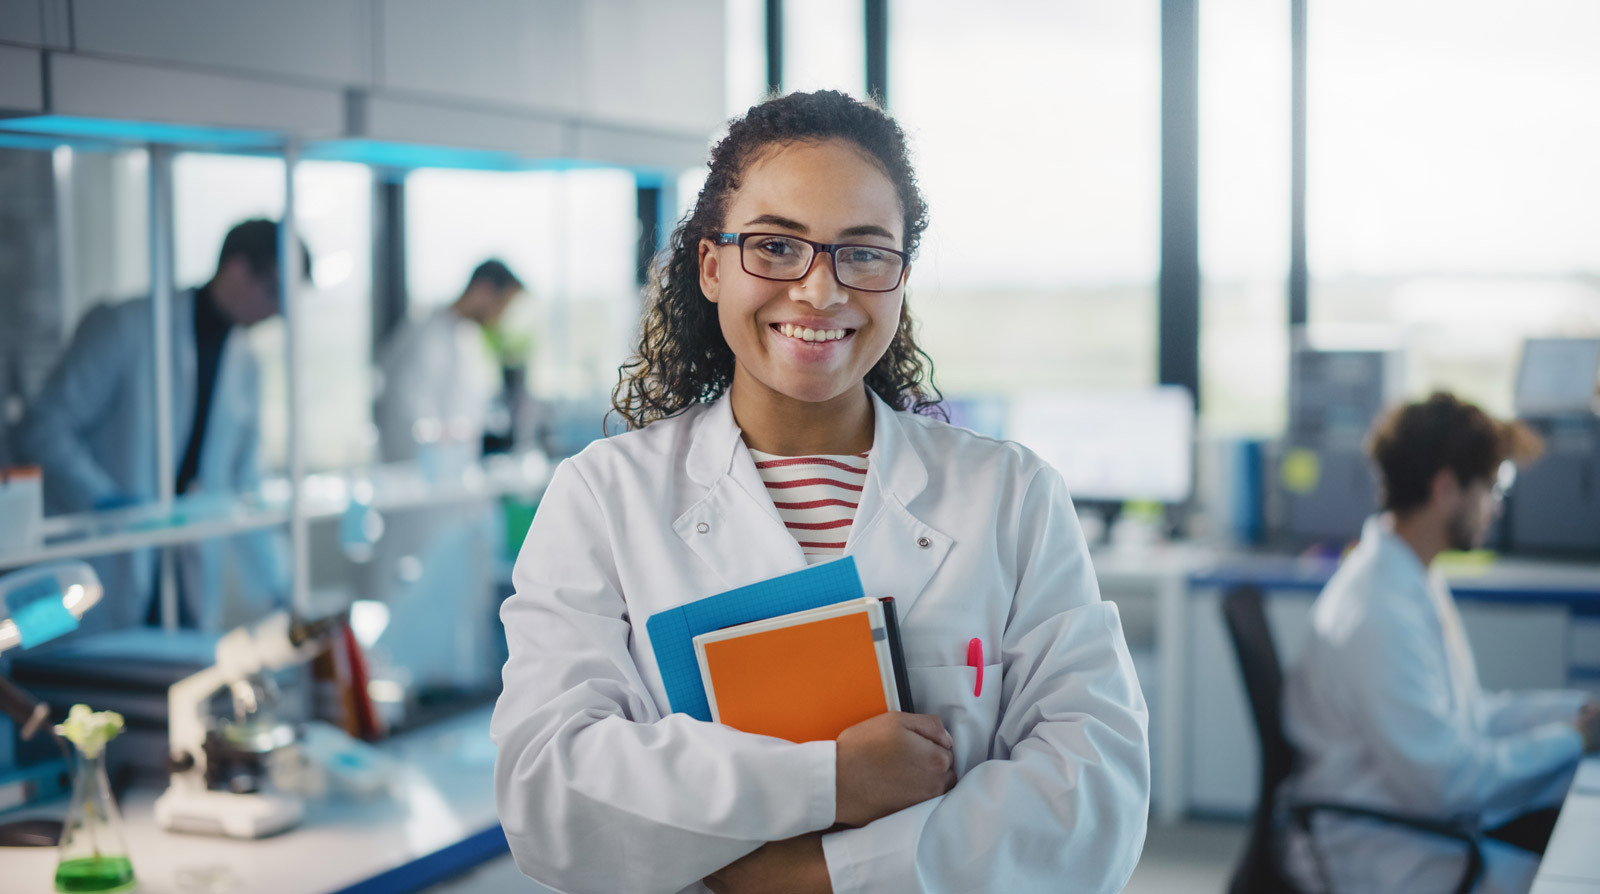 A woman in a lab coat holding books smiling. 